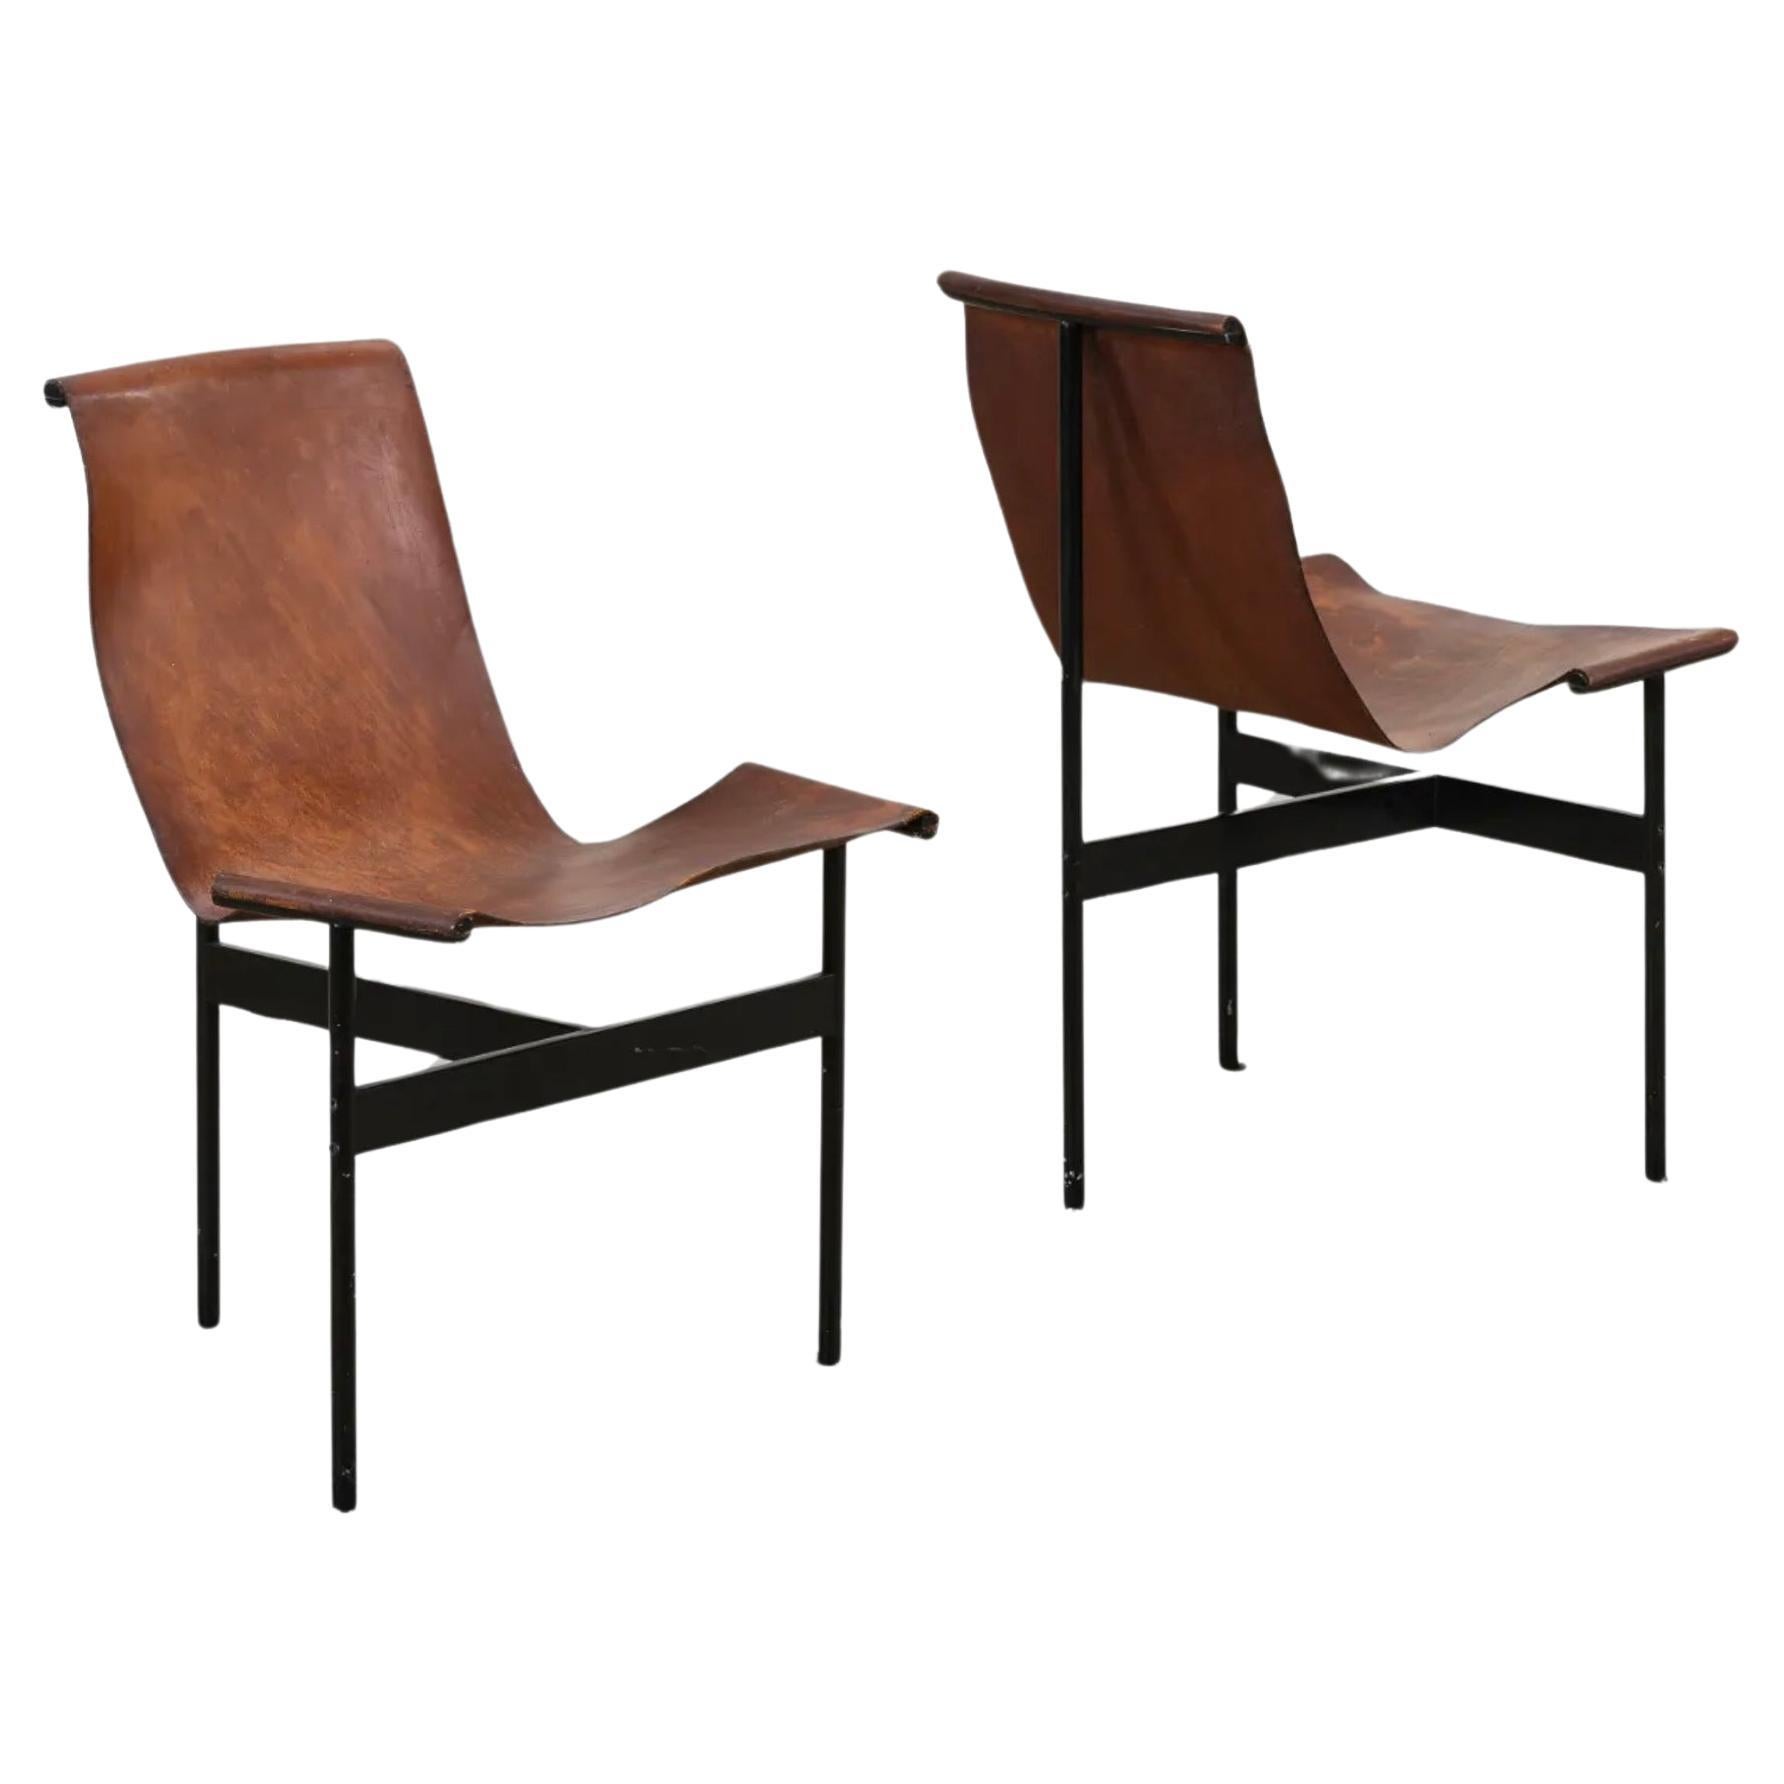 A Pair of Katavalos, Littell, and Kelly - T-Chairs For Sale